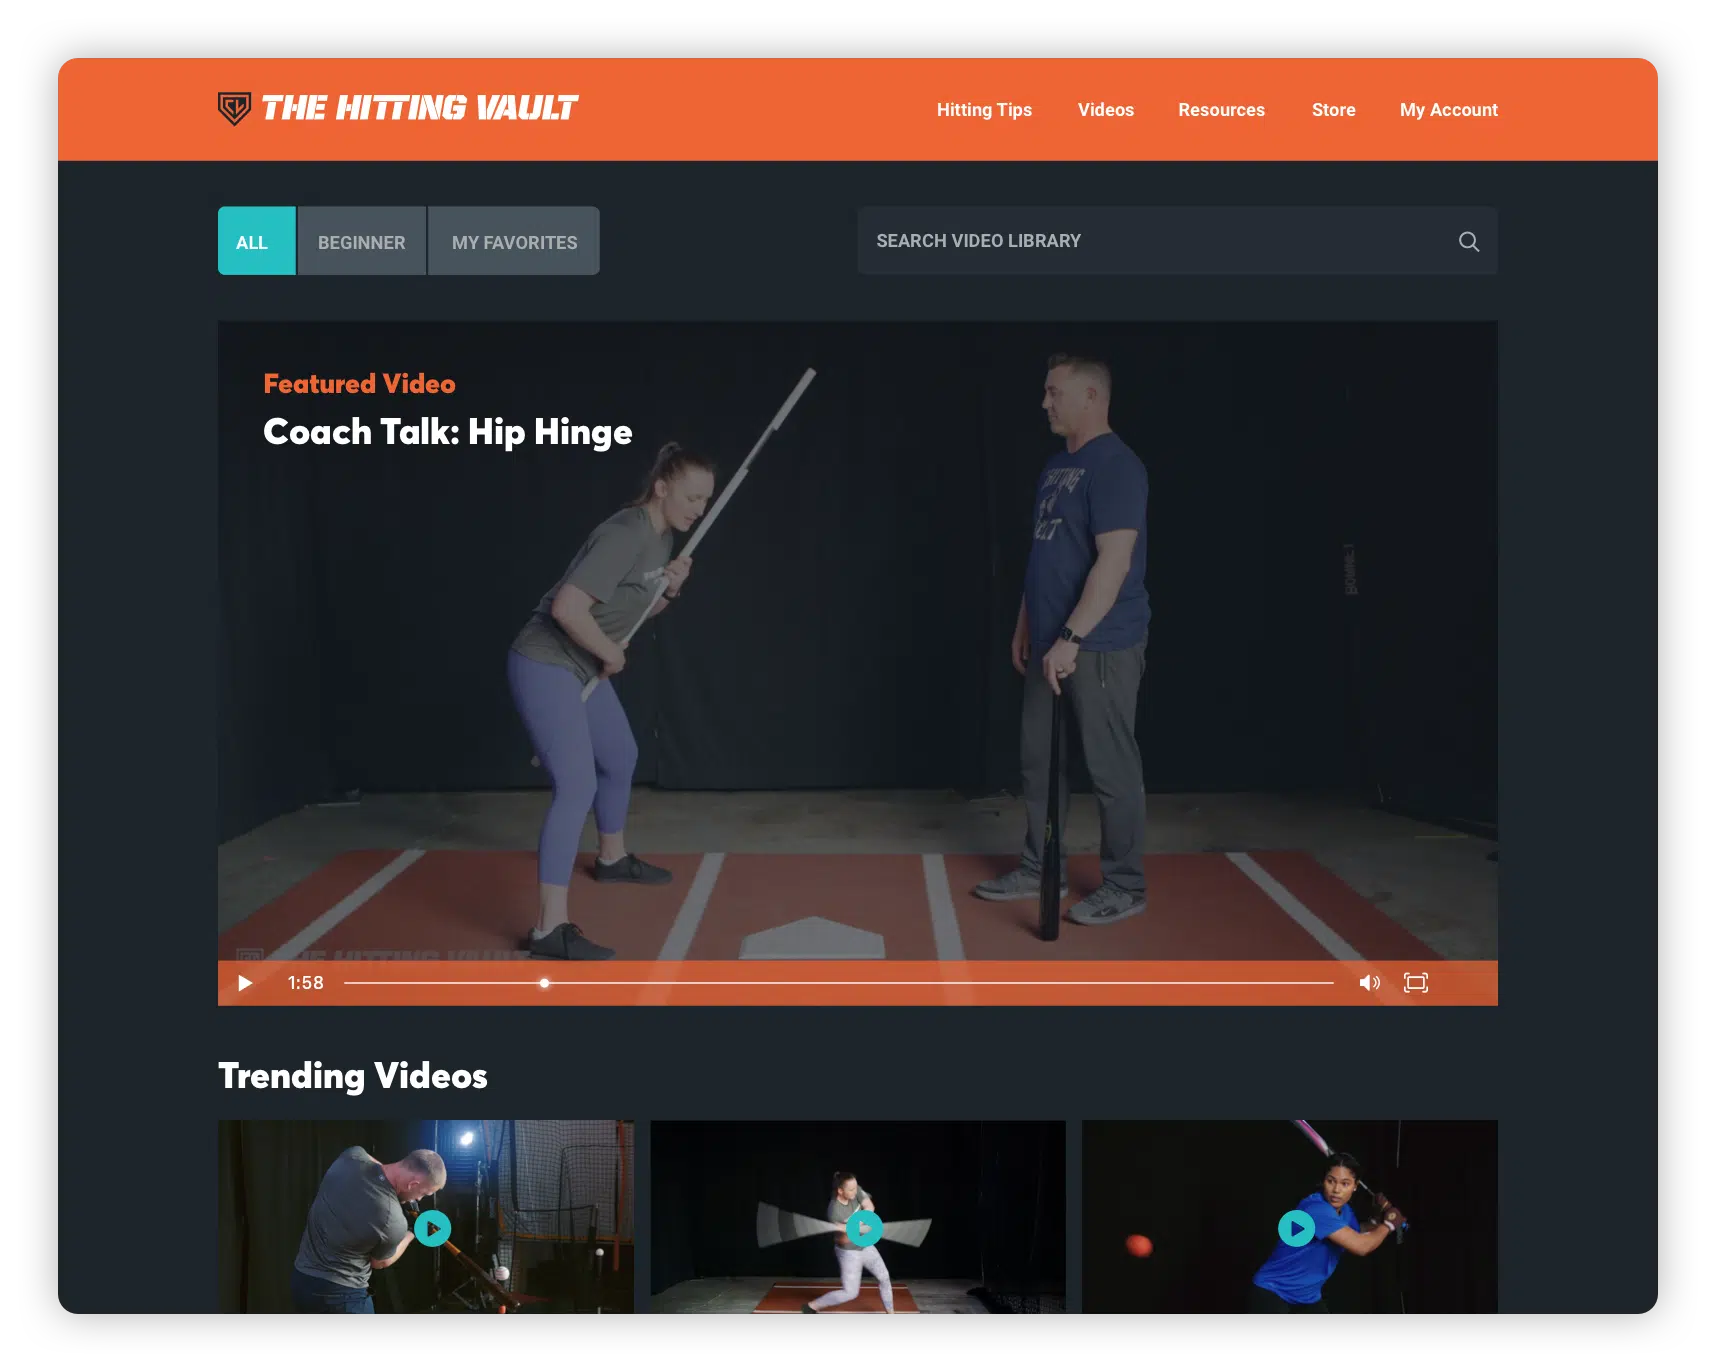 In this frozen video image, a coach and student practice the perfect baseball swing